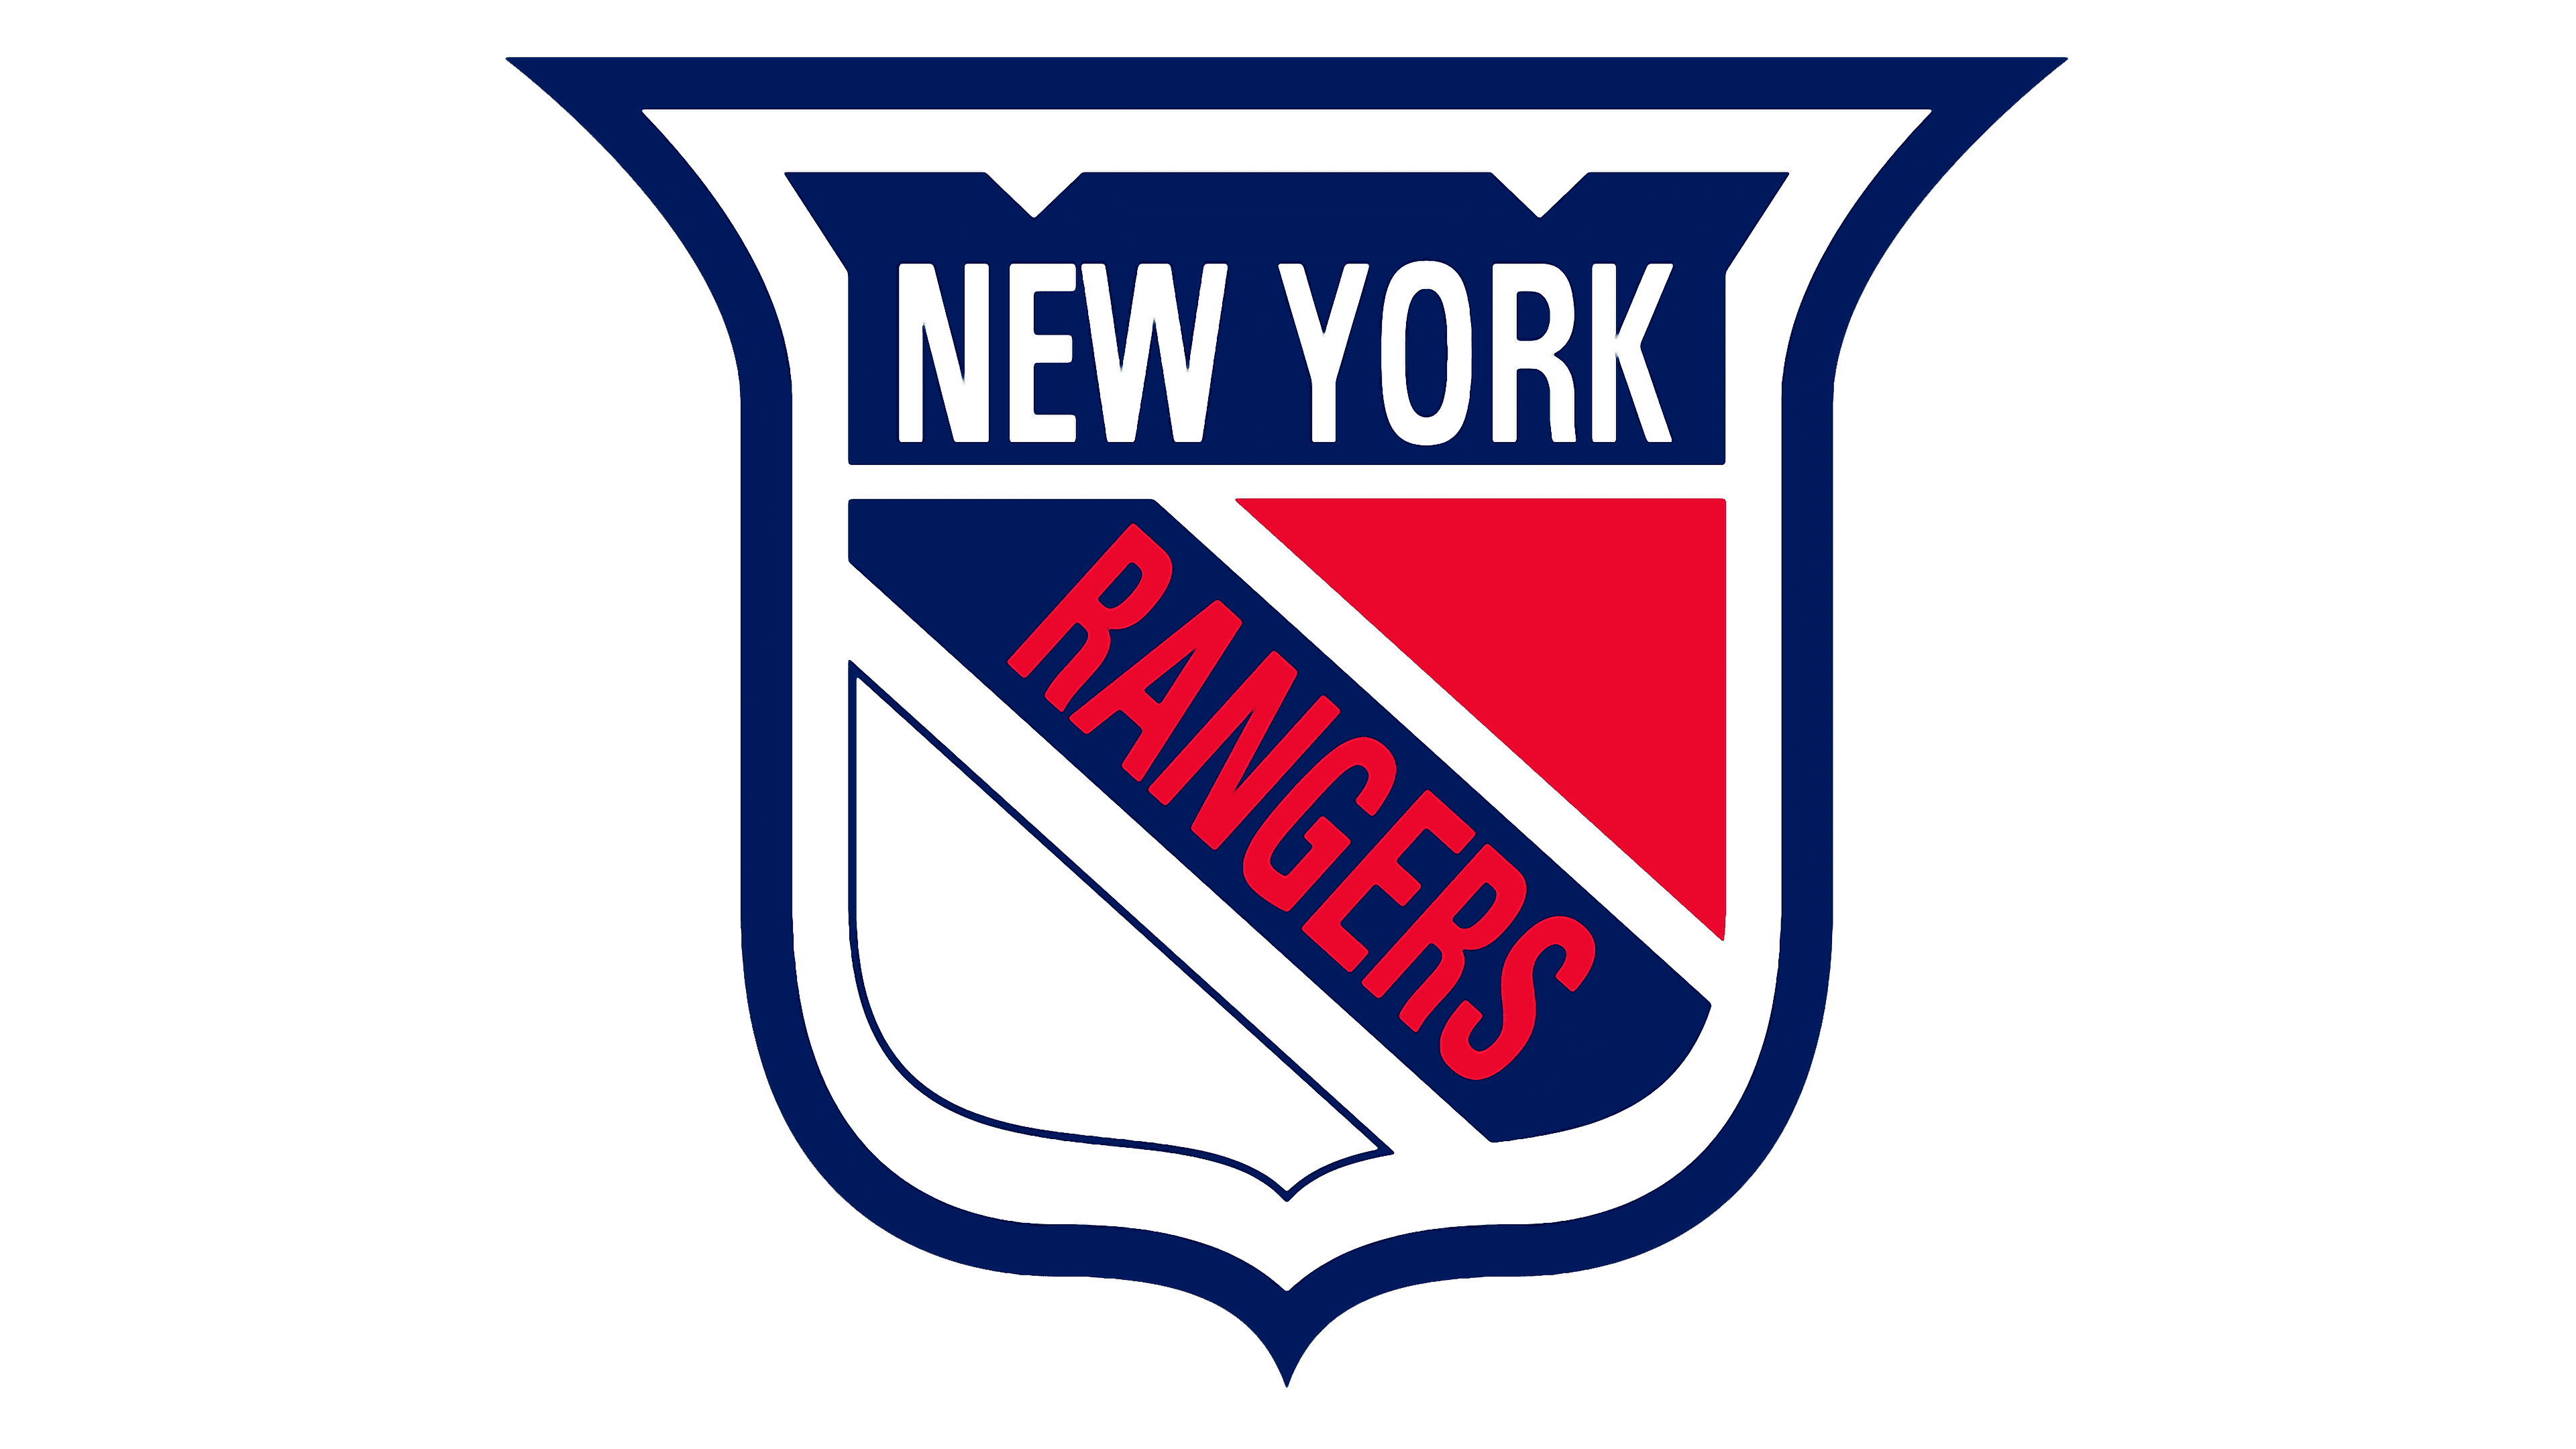 Athlete Logos on X: Since the @NYRangers brought back the statue of liberty  jersey, I had to make a neon! #LGR #NYR #NoQuitInNY #NeonArt #NYNeonProject   / X